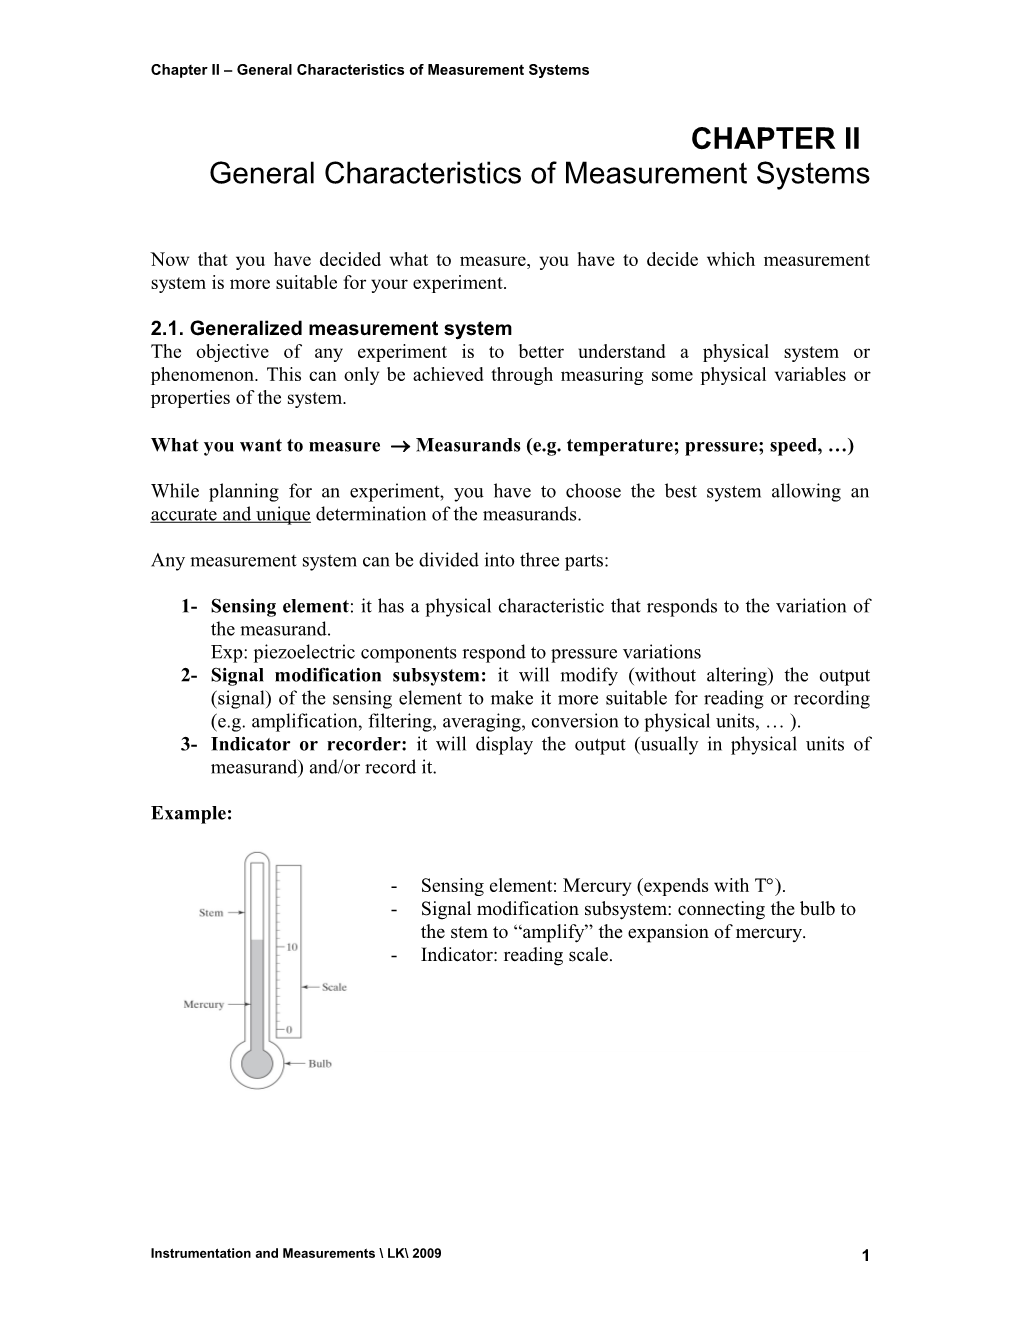 Chapter II General Characteristics of Measurement Systems